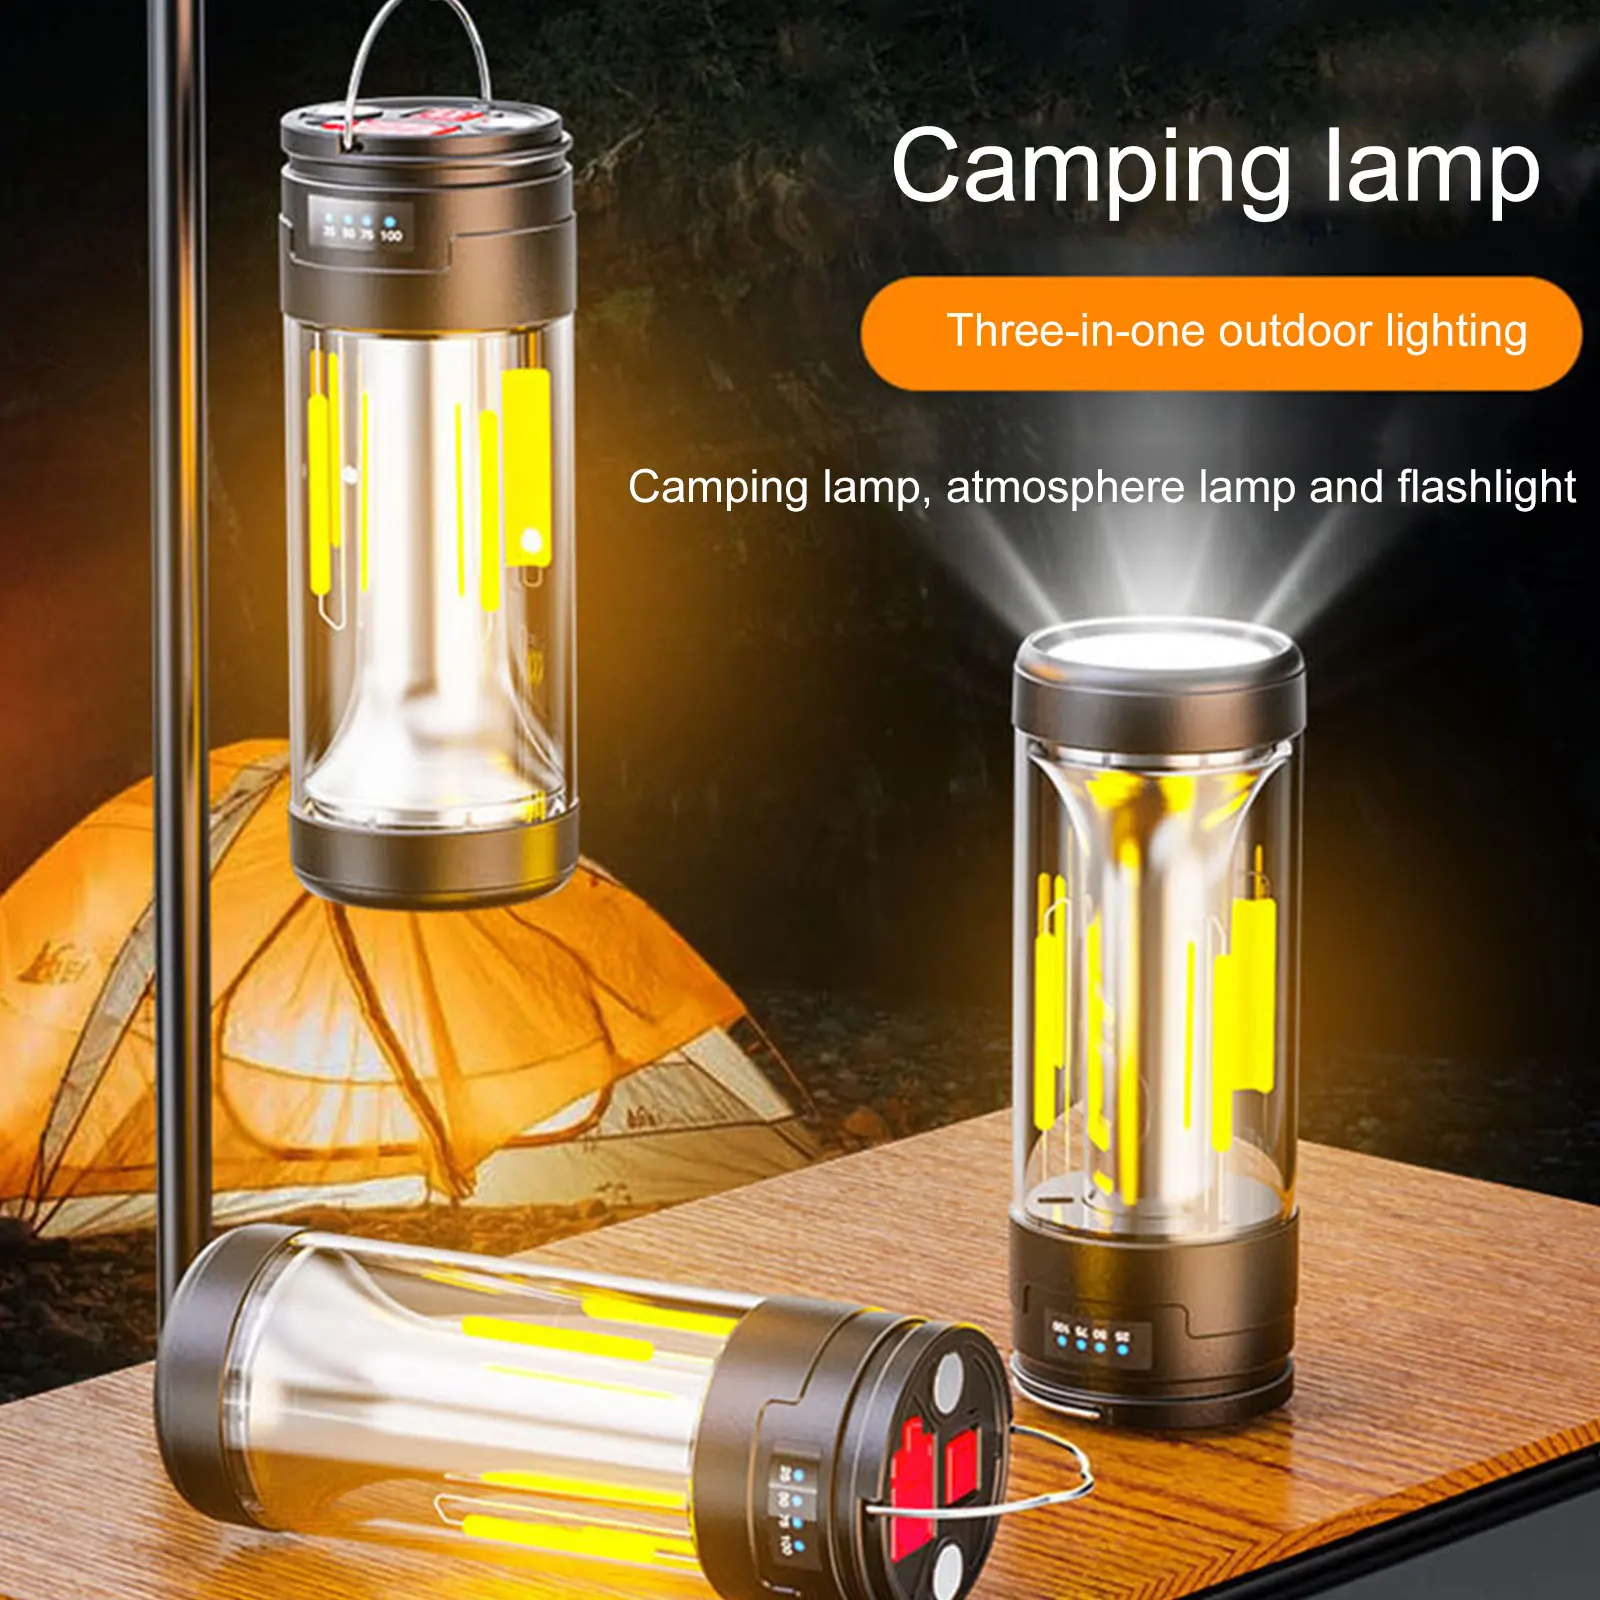 Portable Camping Lantern Lighting Outdoor Camping Light Flashlight Torch With Magnet Emergency Power Bank Tent Light Work Lamp